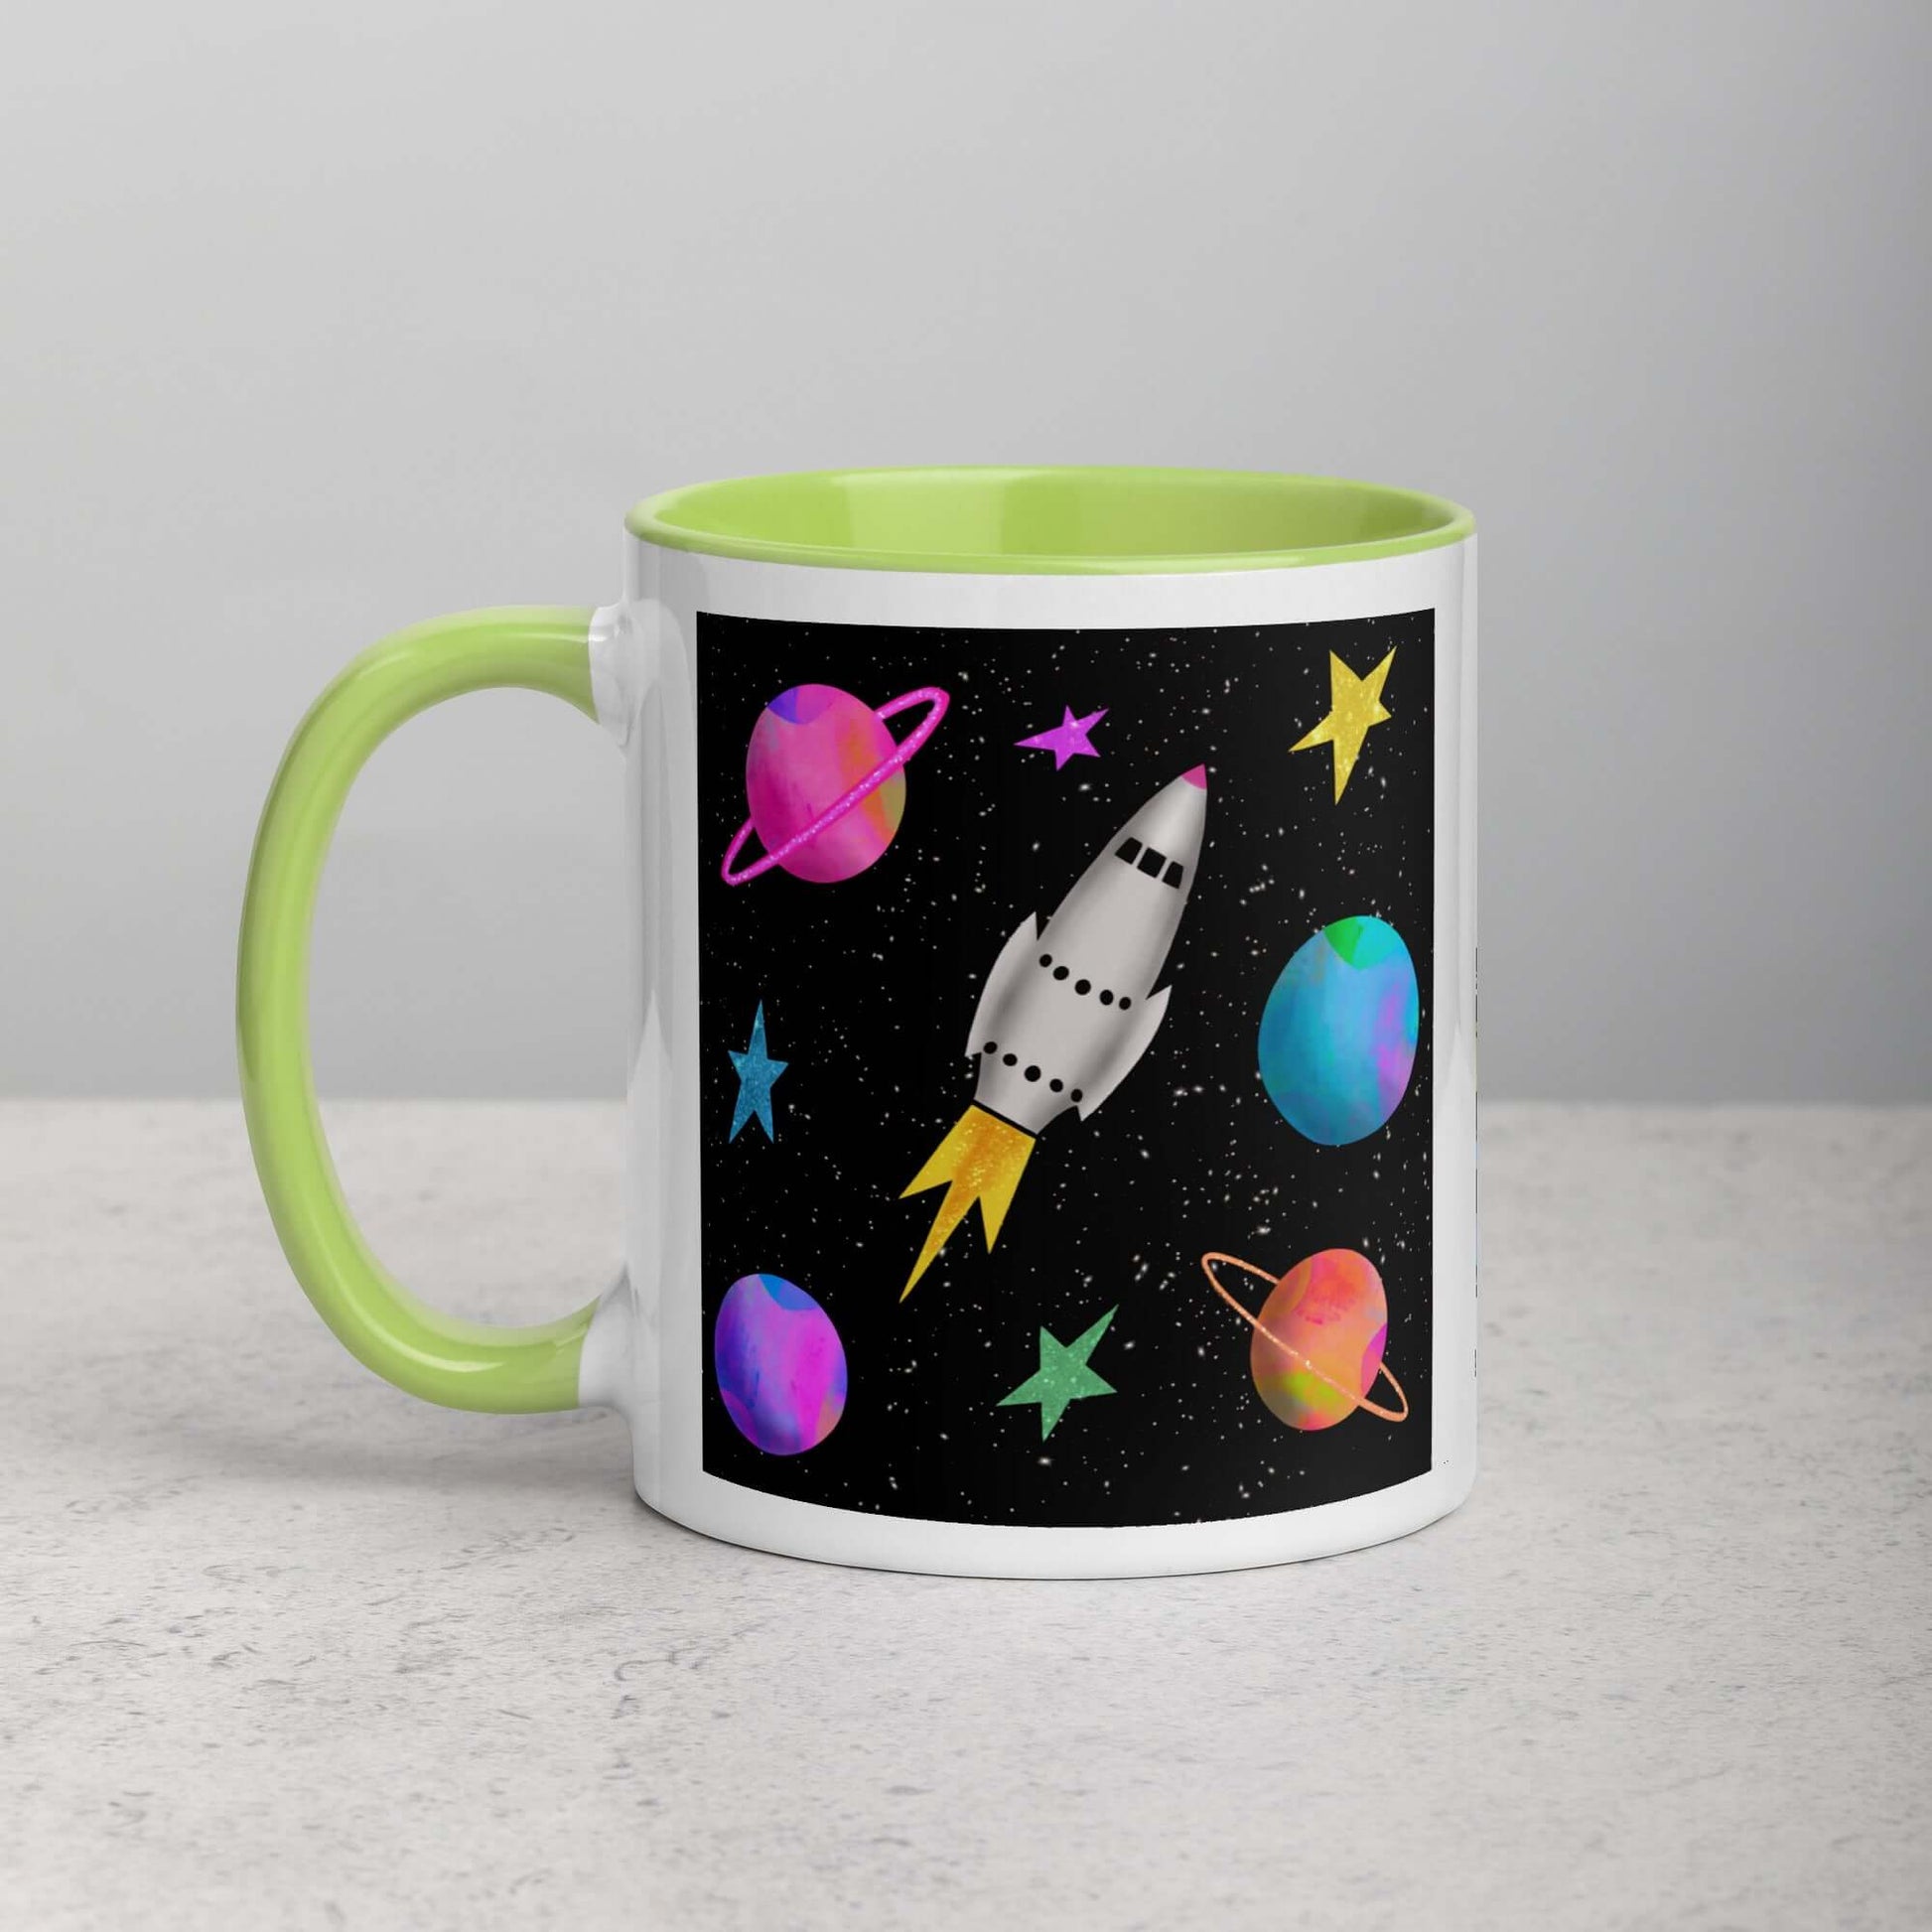 Whimsical Space Rocket with Colorful Planets and Stars on Black Background “Space Rockets” Mug with Lime Green Color Inside Left Handed Front View